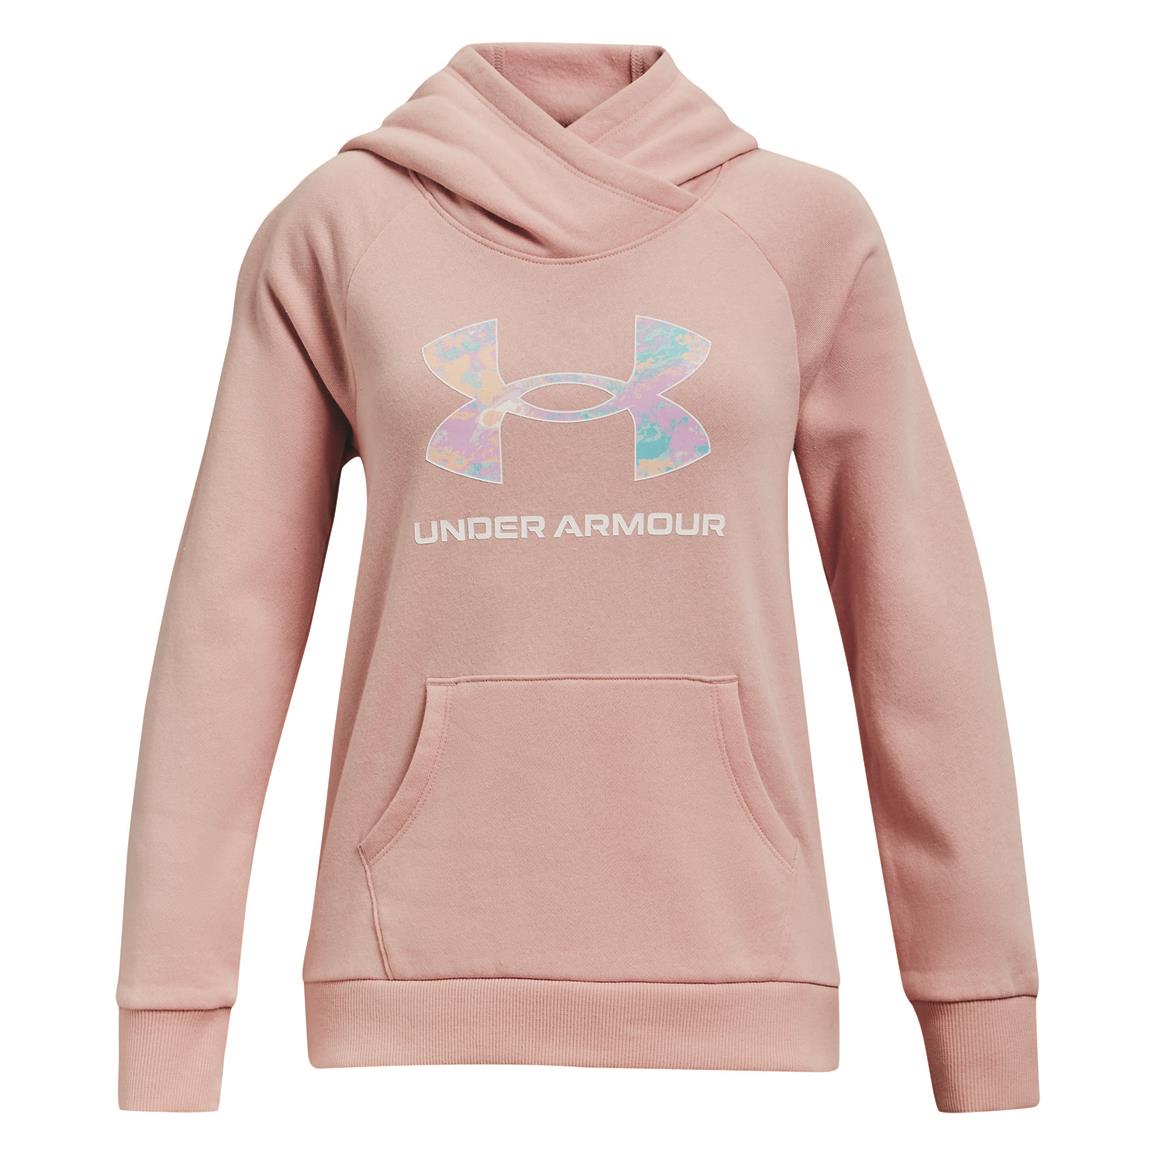 Under Armour Girls' Rival Logo Hoodie, Retro Pink/cloudless Sky